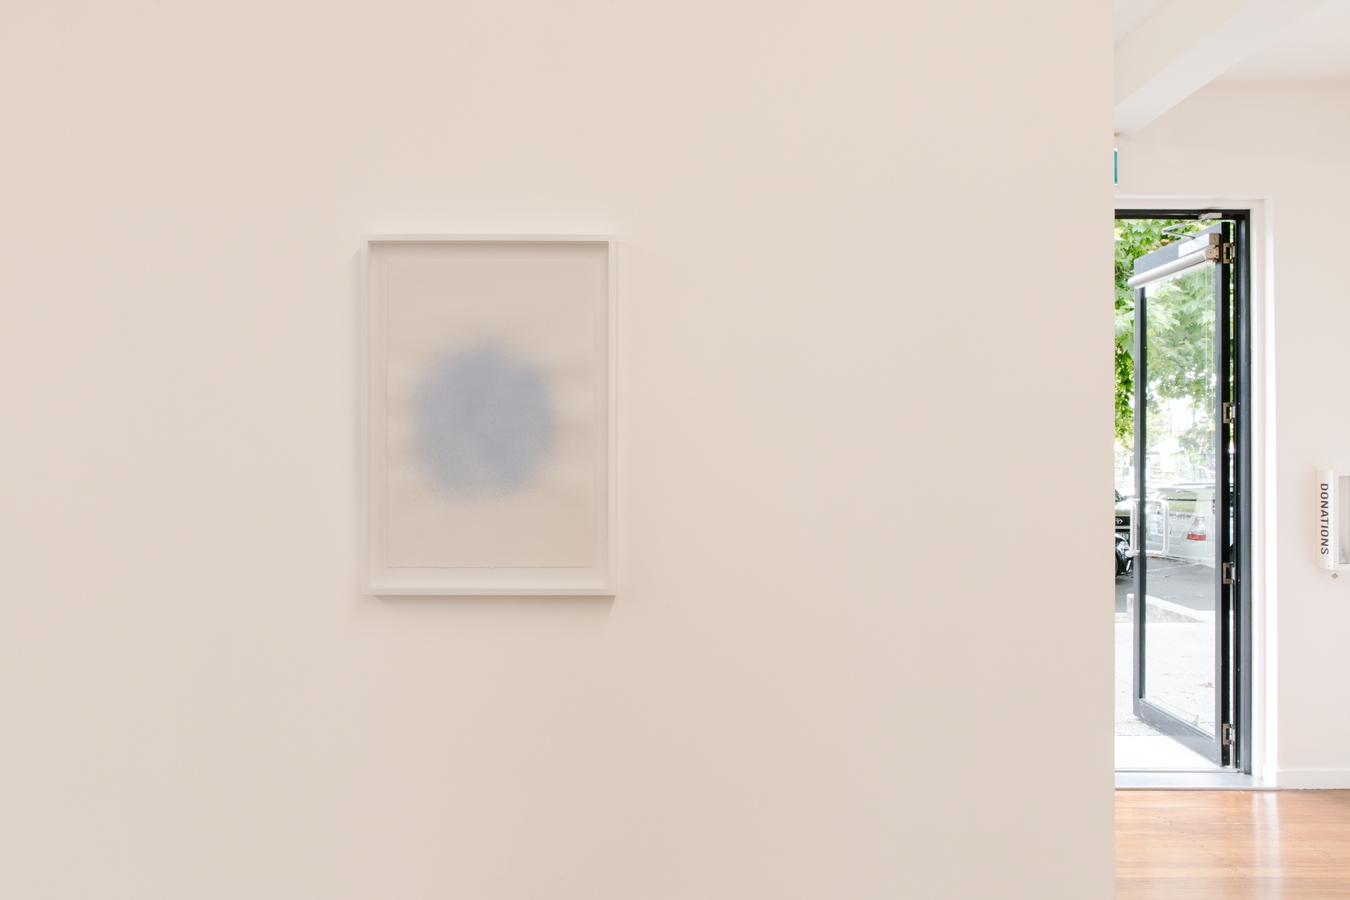 Image: D Harding, From the series Three Light Blue Breaths (installation view), 2022. Ultramarine blue, terra verde and pigment on 185gsm hot-pressed Arches Aquarelle paper. Private collection. Photo by Nancy Zhou.